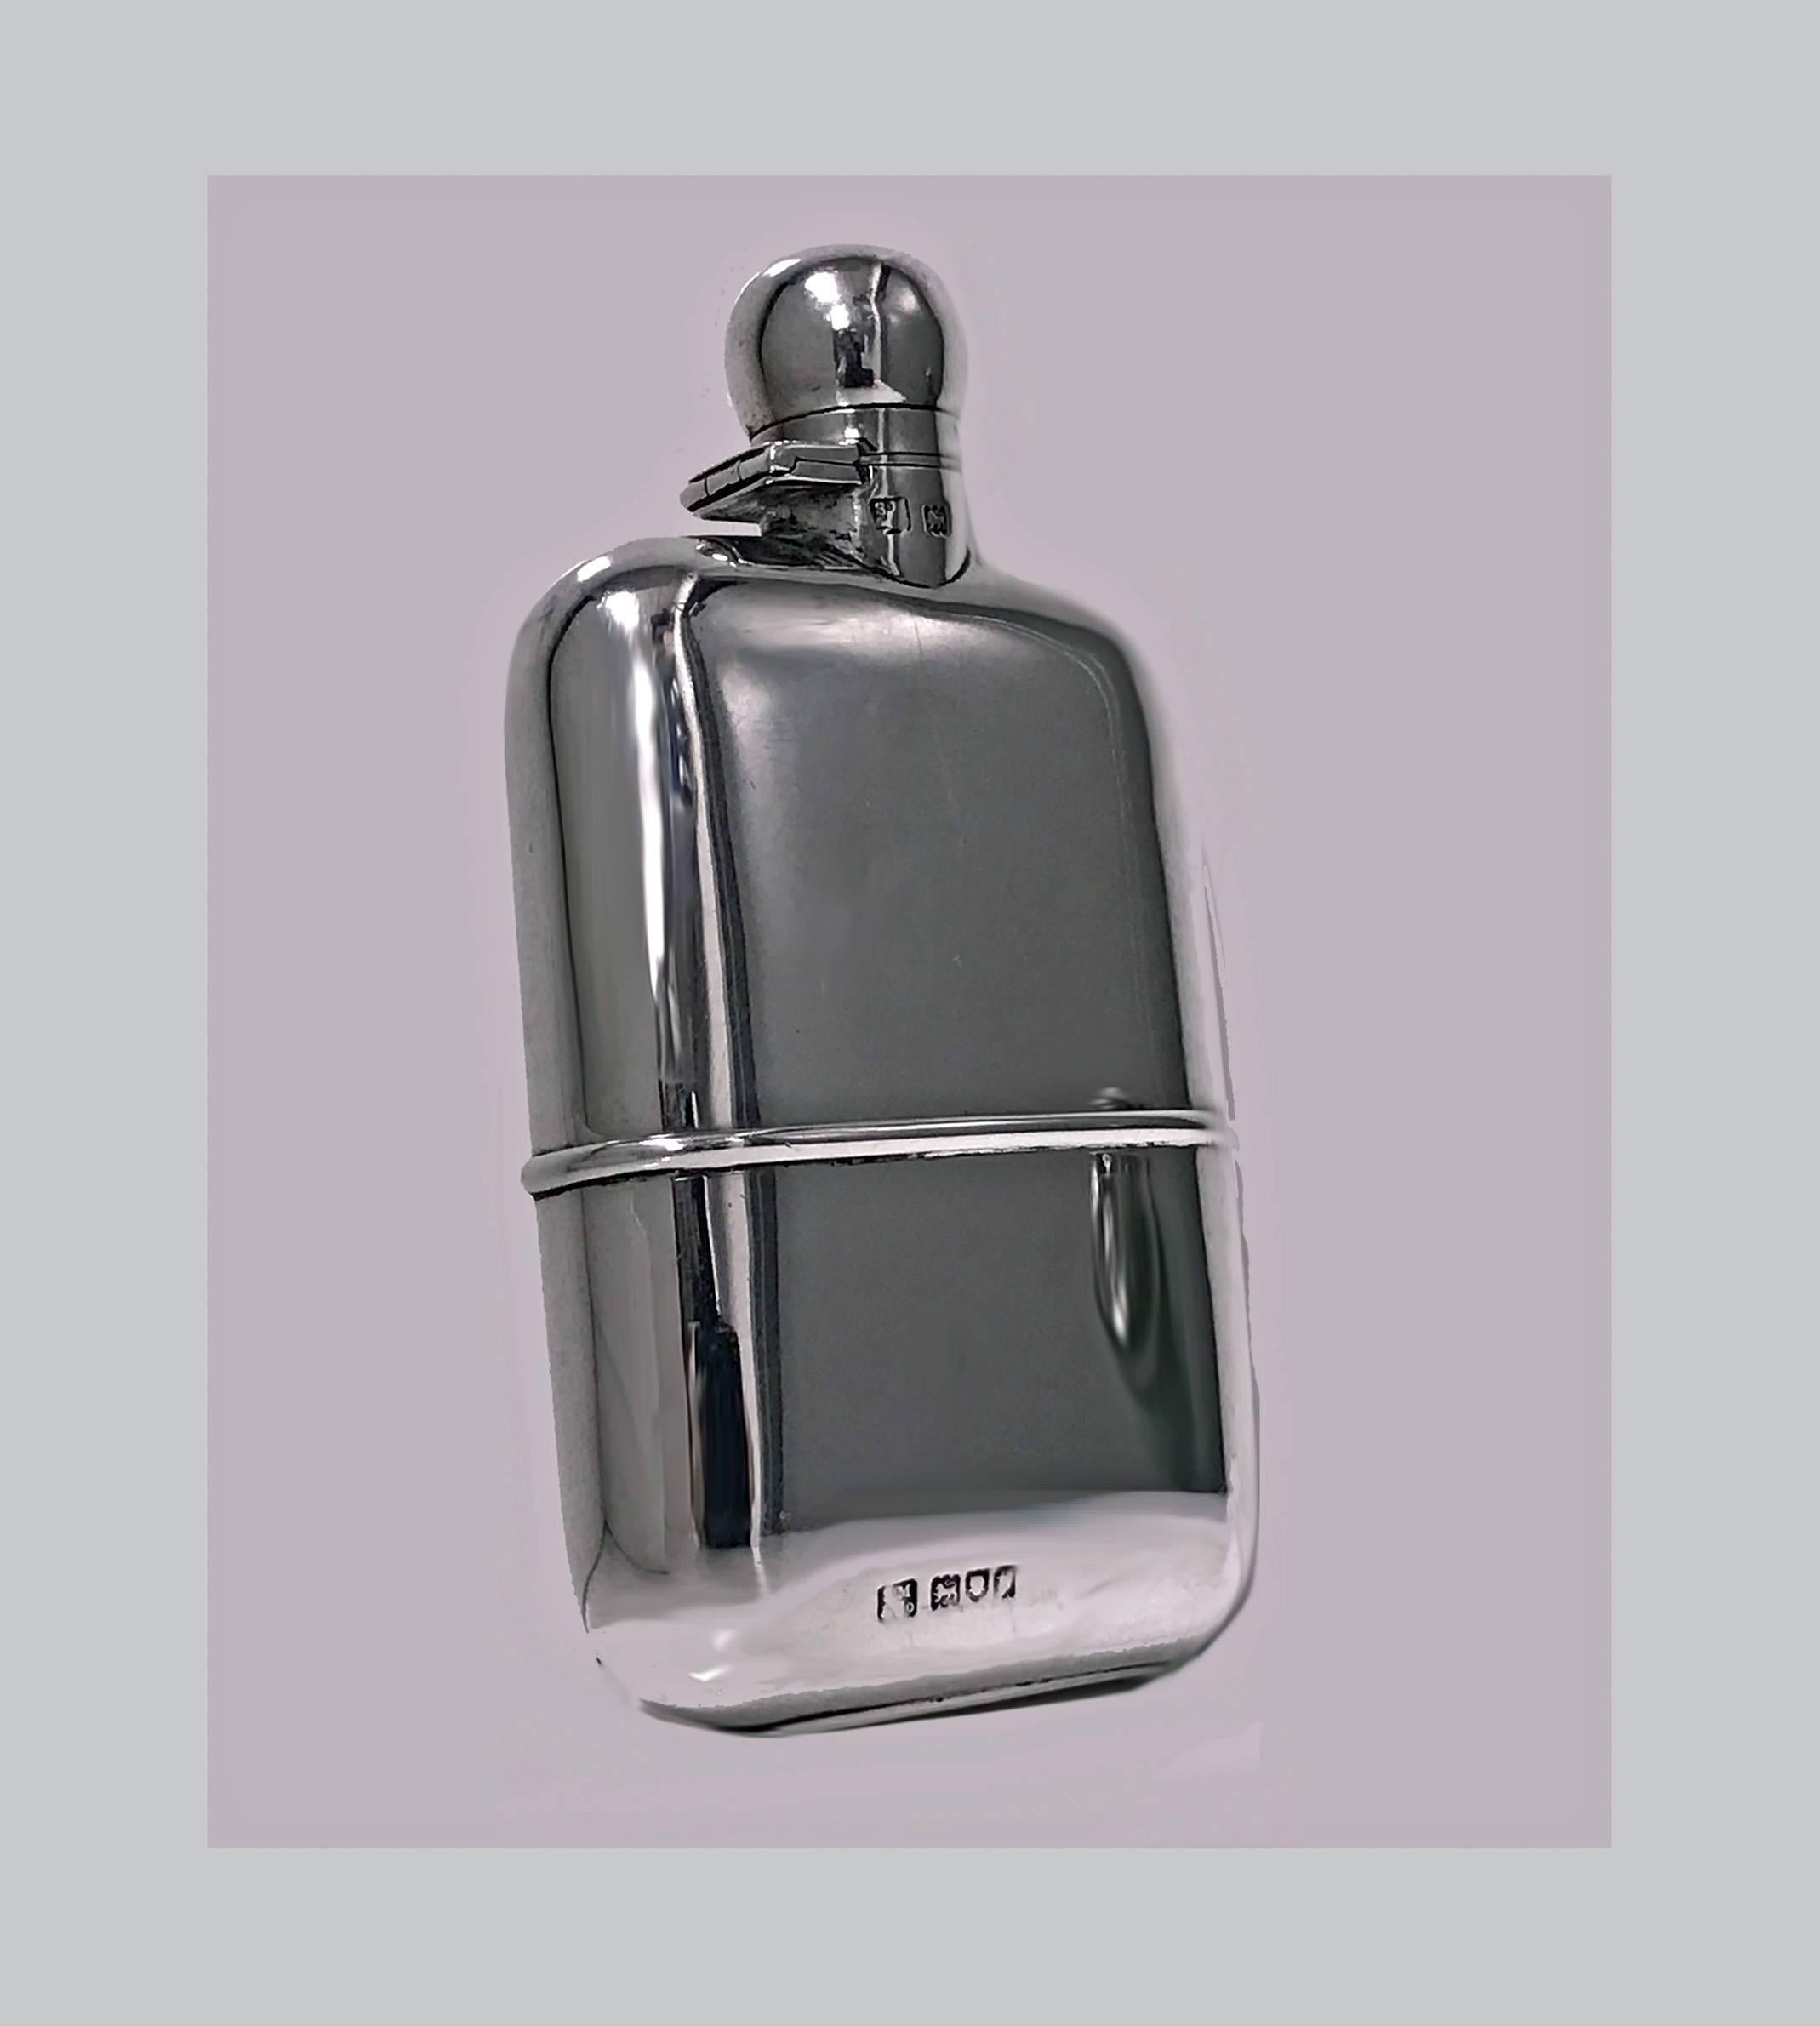 English sterling silver flask, London, 1914, Sampson Mordan Co. The flask of plain convex form with detachable silver cup, bayonet twist top. Fully hallmarked. Measures: 5 x 2.5 x 1 inches. Weight 141.73 grams.